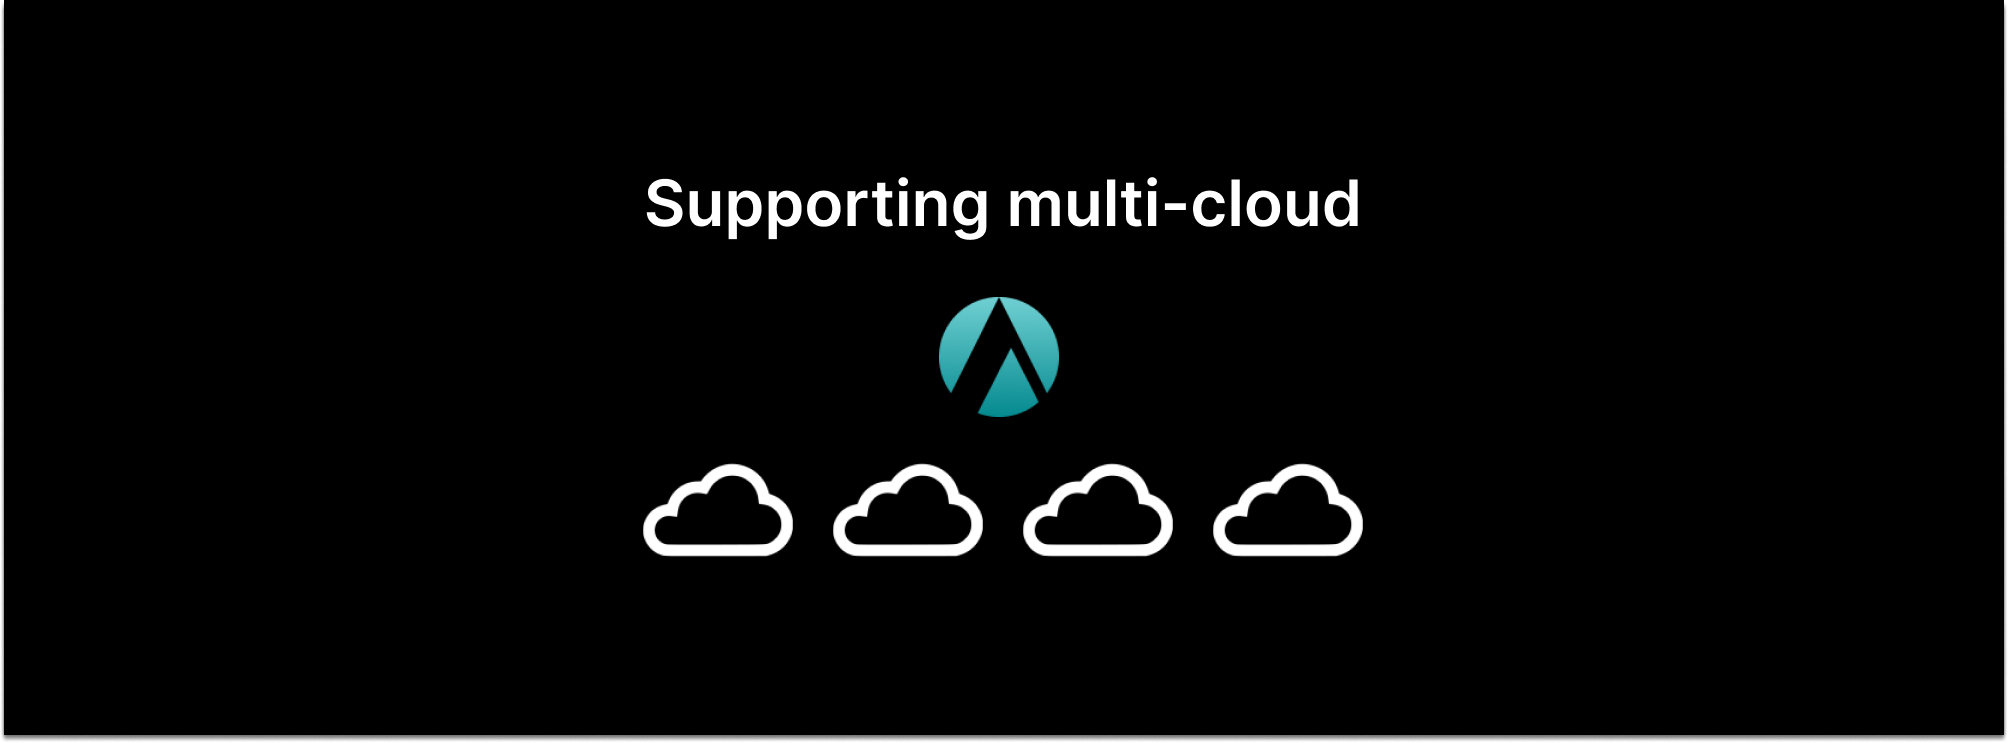 Aserto supports multi-cloud production workloads